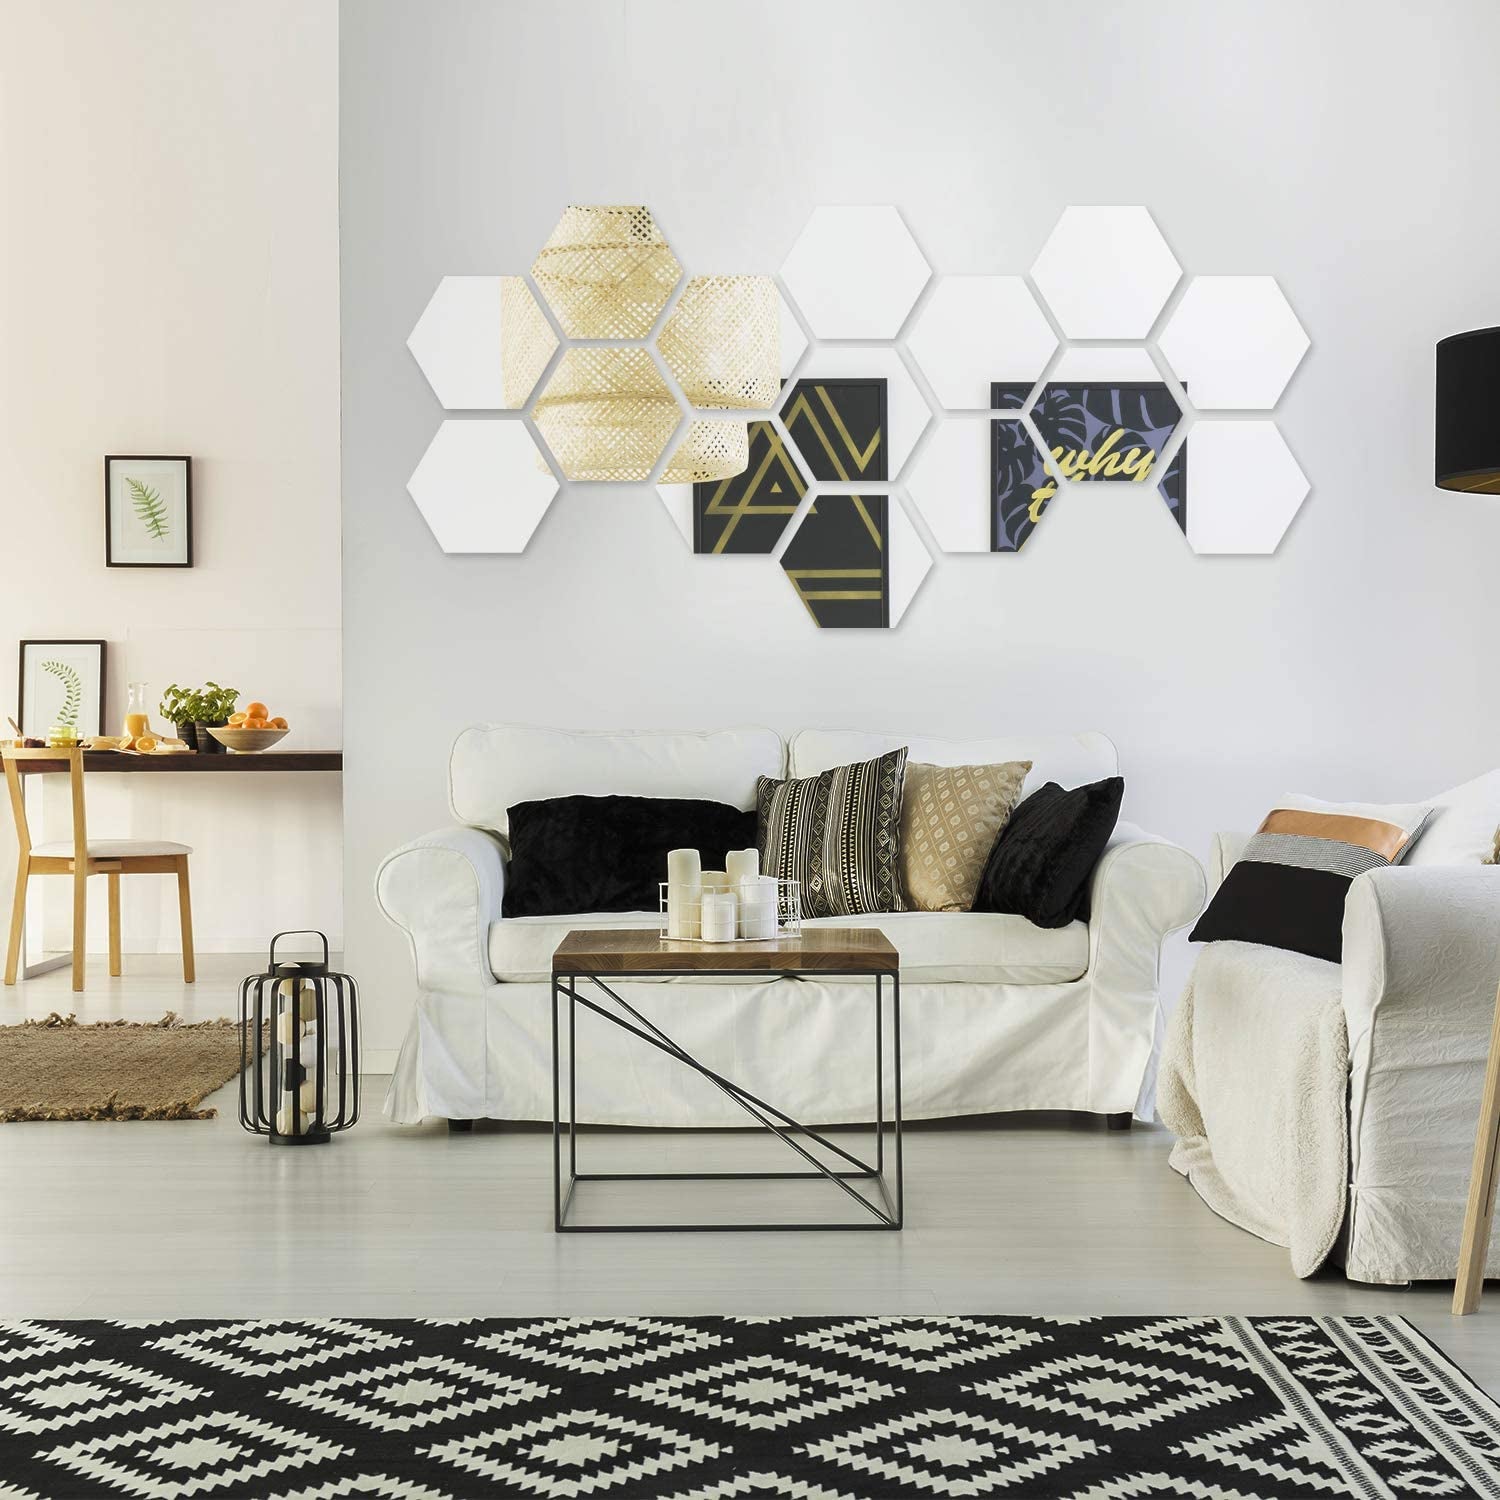 15 Pieces Removable Acrylic Mirror Setting Wall Sticker Decal for Home Living Room Bedroom Decor (Hexagon, 15 Pieces)